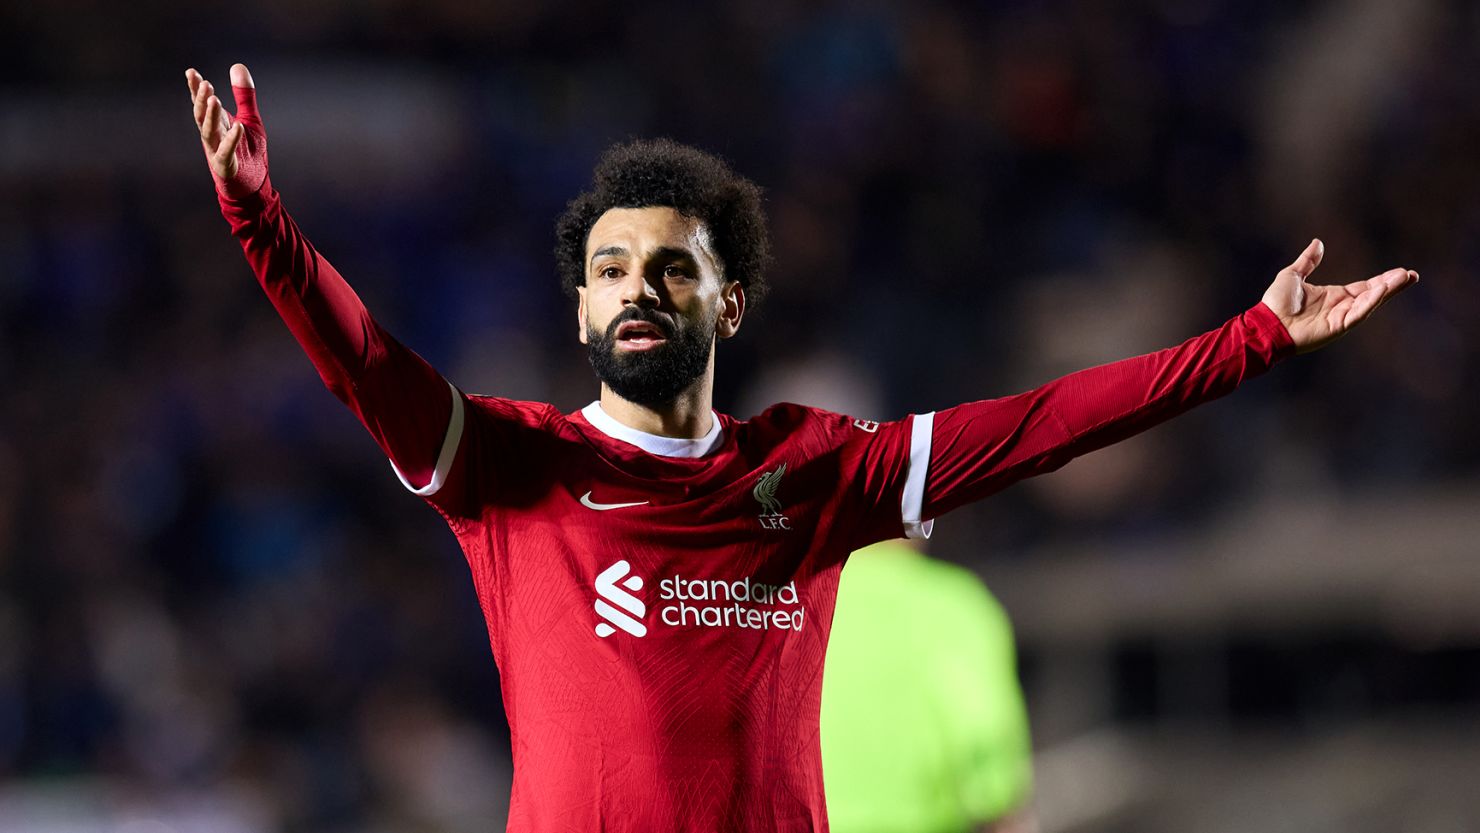 Mohamed Salah scored but also missed a huge chance against Atalanta in the Europa League quarterfinals on Thursday.